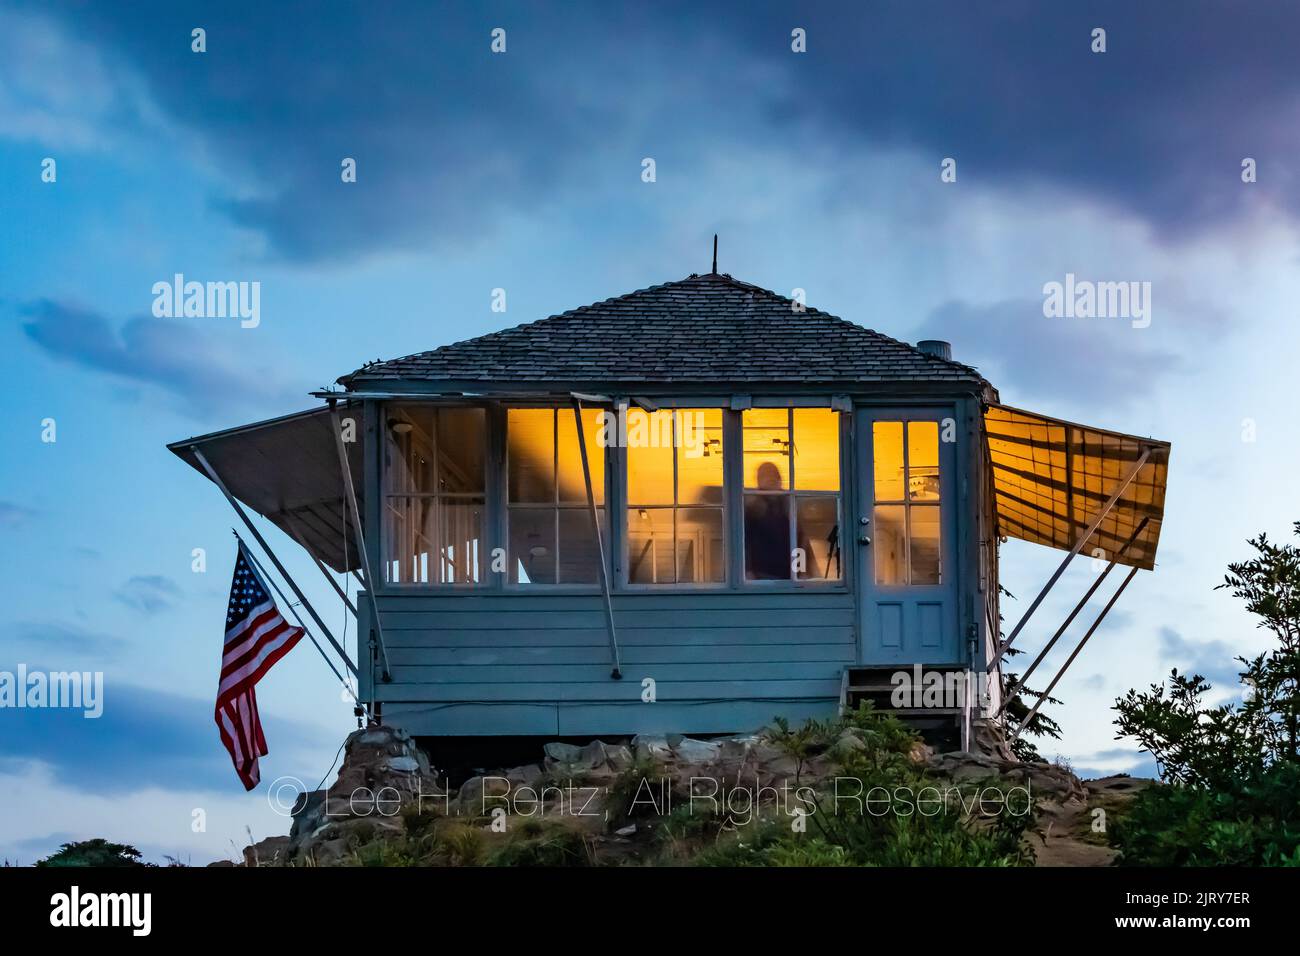 Twilight at Evergreen Mountain Lookout, with visitors renting the lookout lighting it up inside, Mt. Baker–Snoqualmie National Forest, Washington Stat Stock Photo